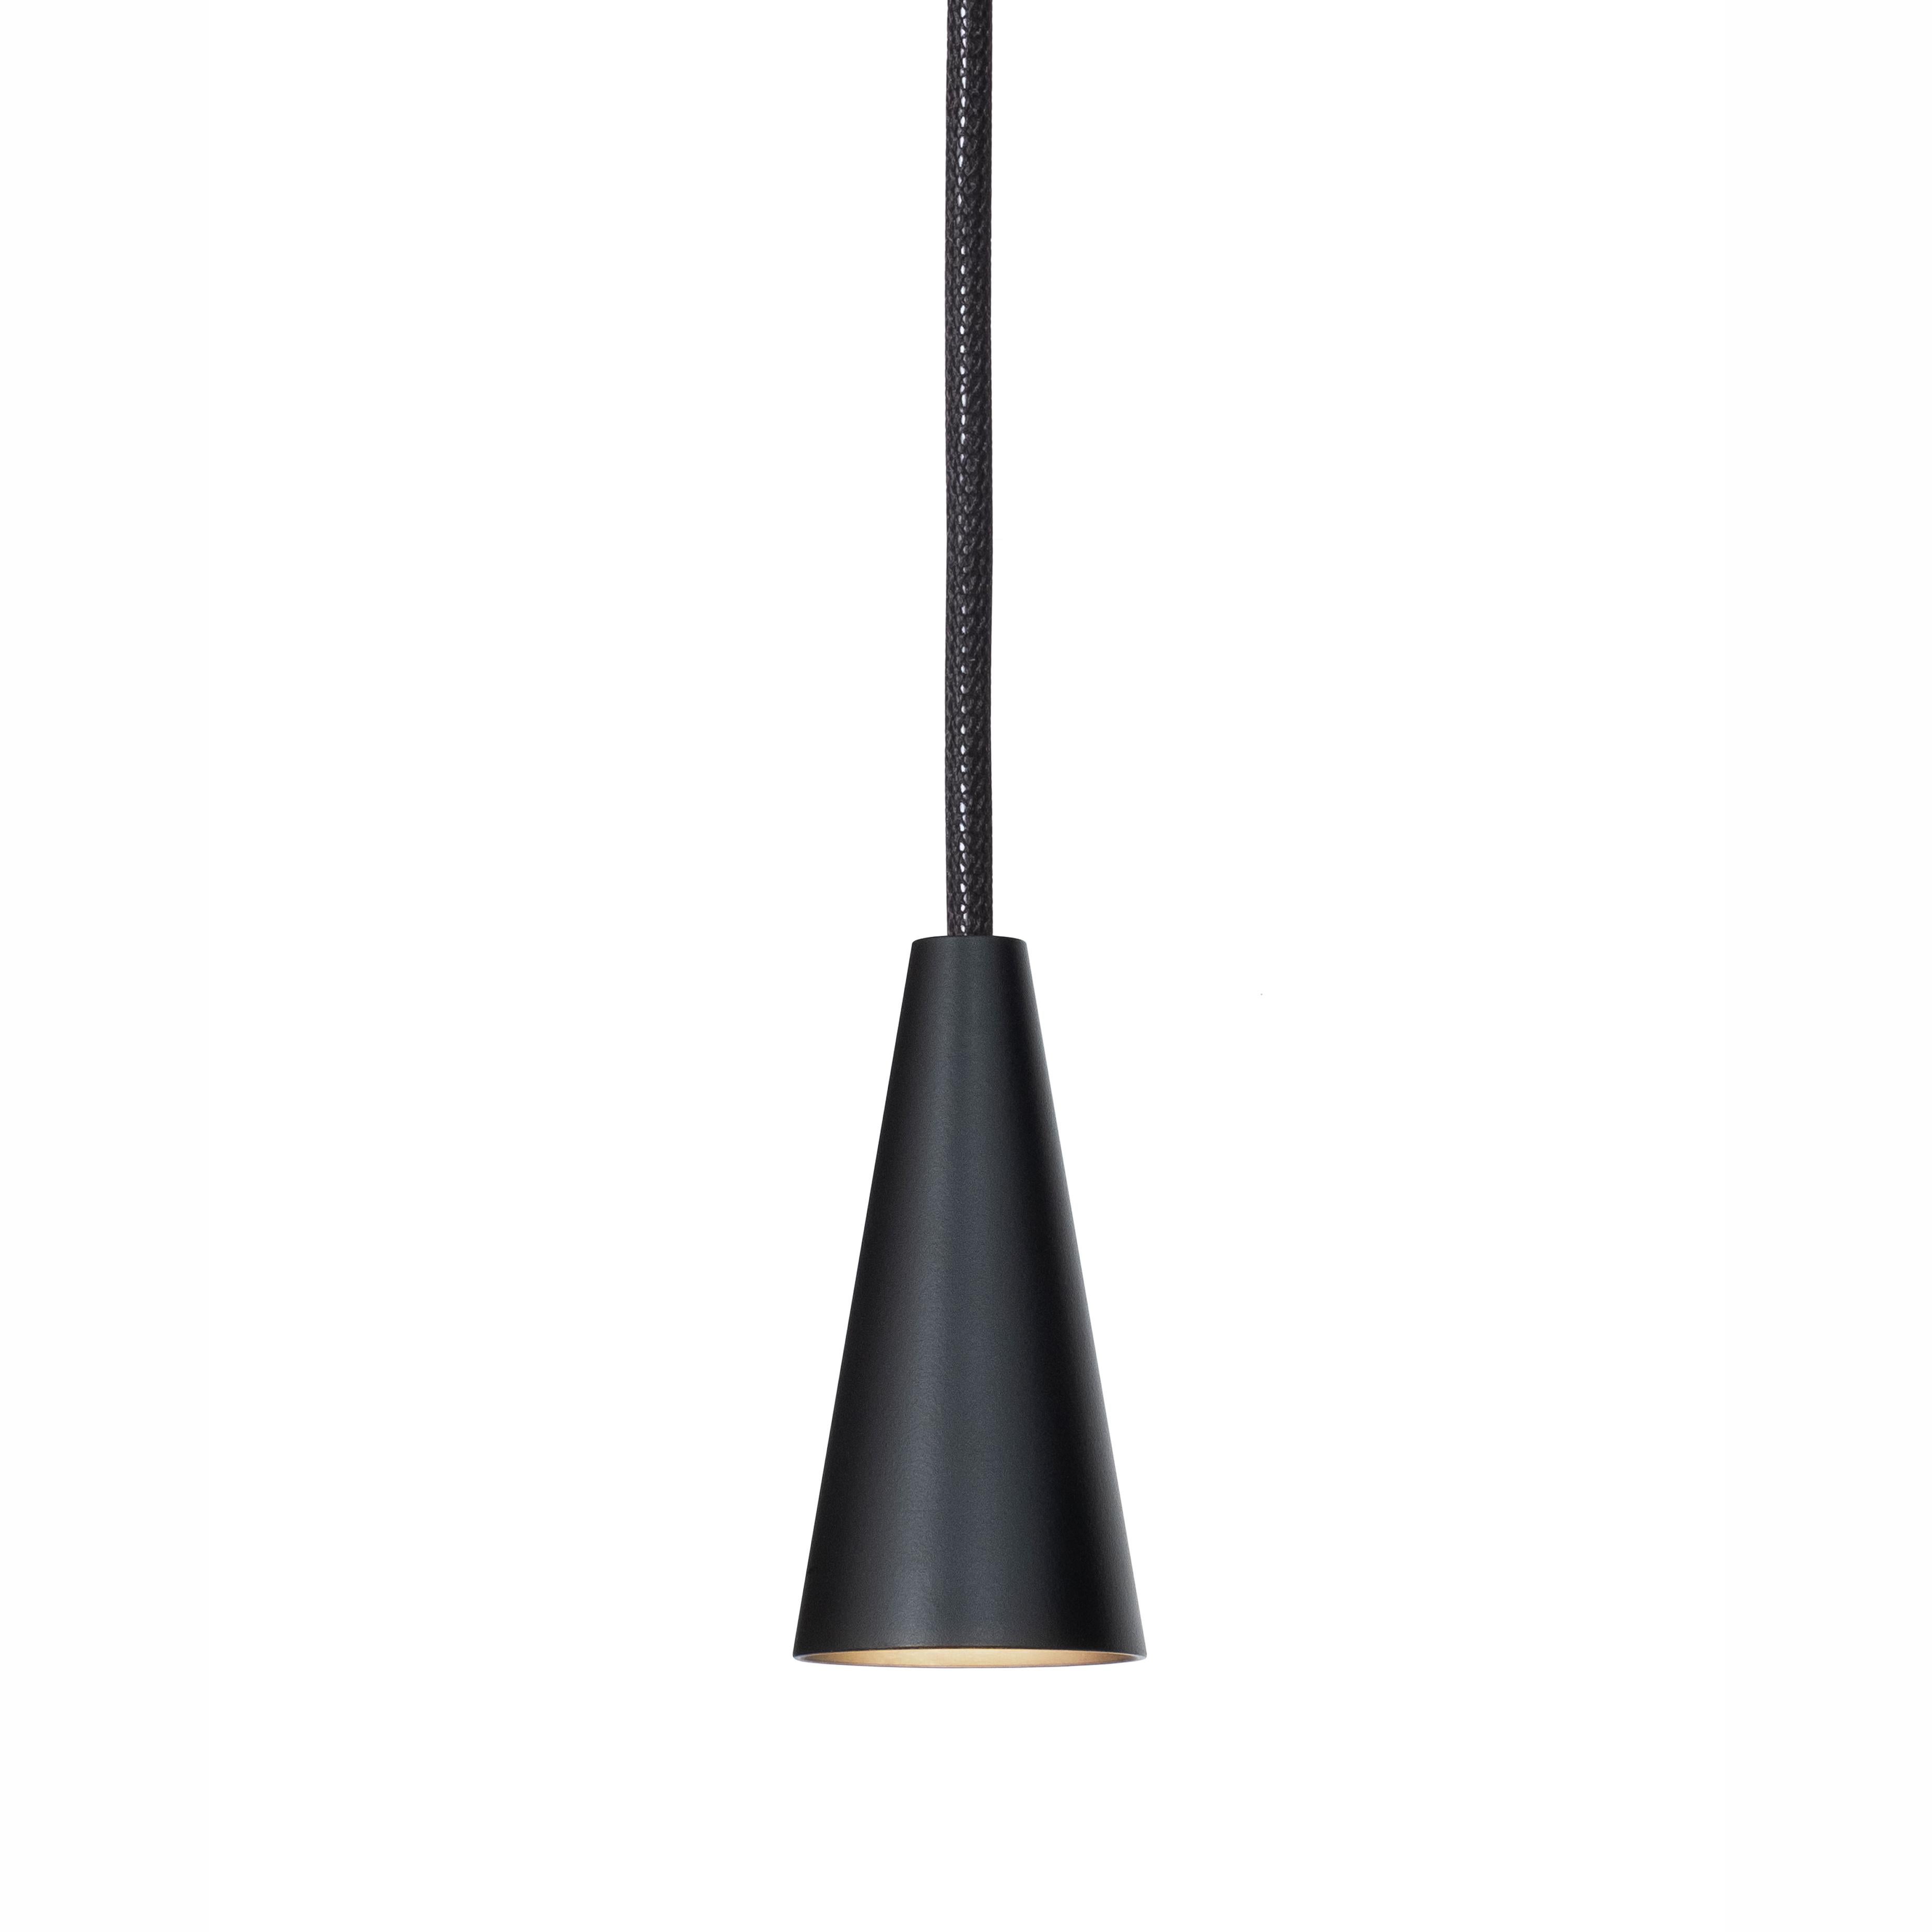 Set of eight ceiling lamp model 3491-8 Massiv black EDT by Henrik Tengler and manufactured by Konsthantverk.

The production of lamps, wall lights and floor lamps are manufactured using craftsman’s techniques with the same materials and techniques